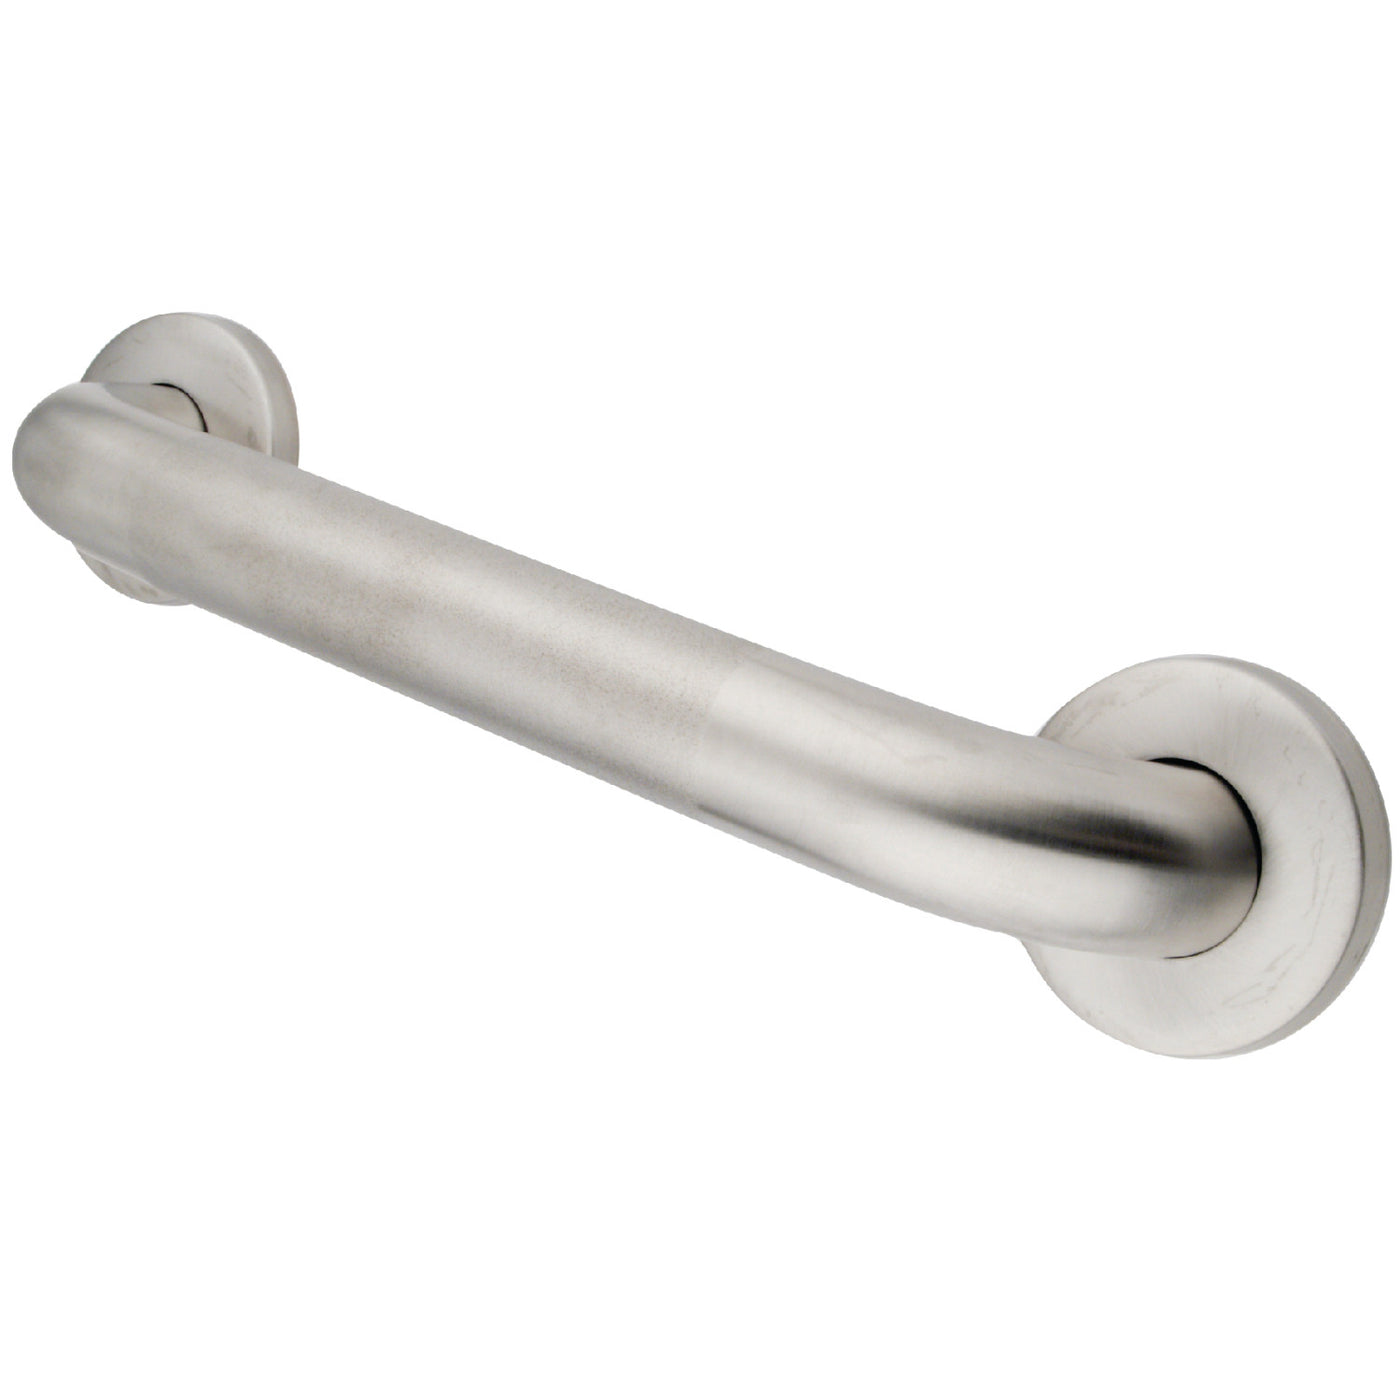 Elements of Design EGB1248CT 48-Inch Stainless Steel Grab Bar, Brushed